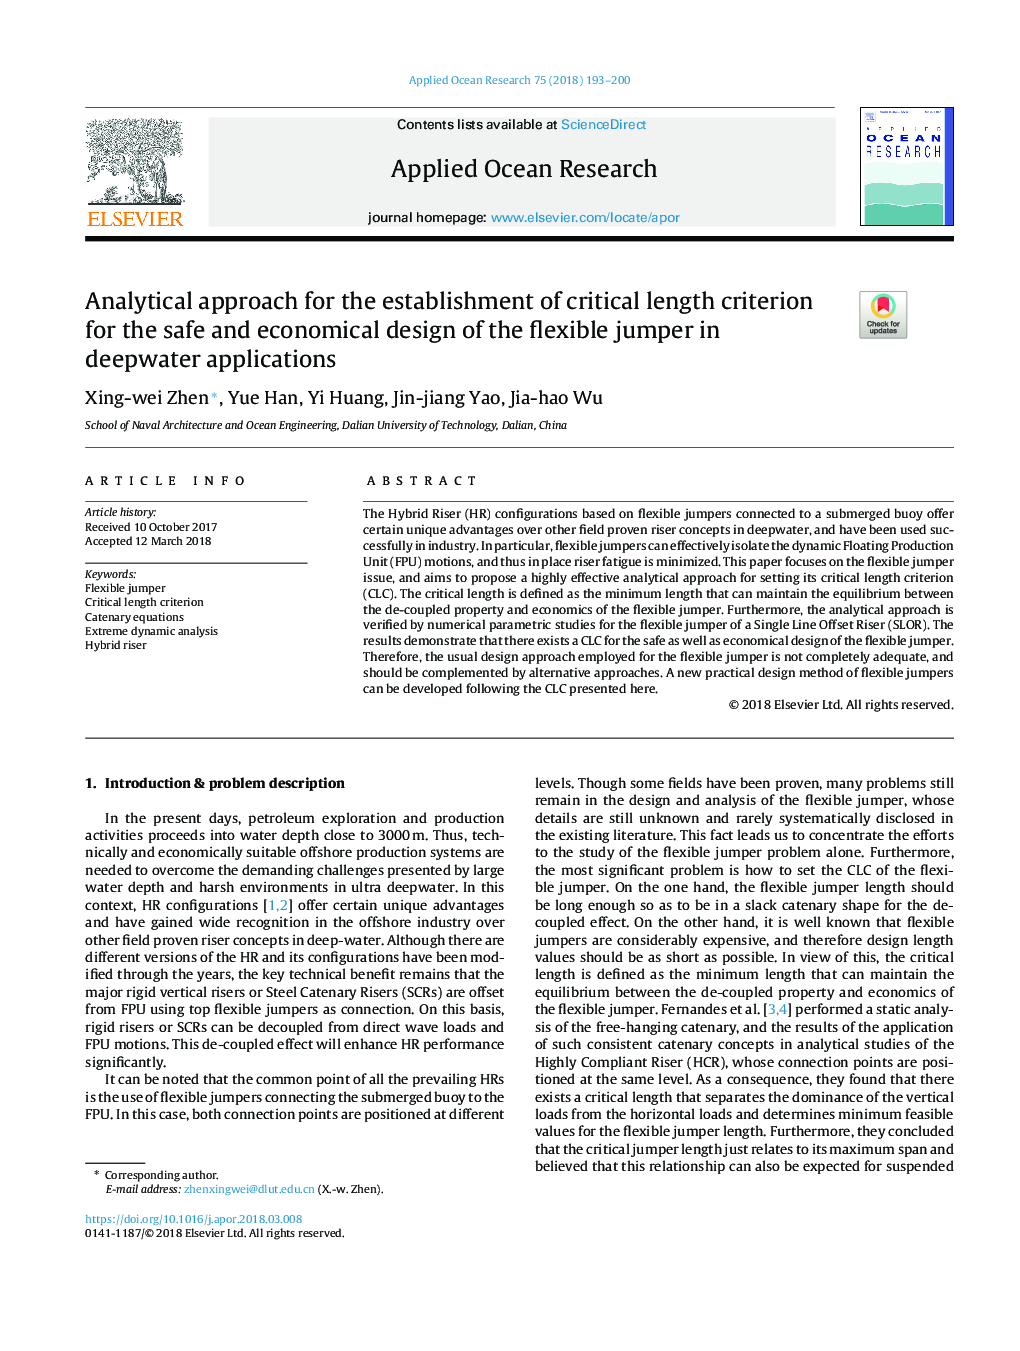 Analytical approach for the establishment of critical length criterion for the safe and economical design of the flexible jumper in deepwater applications